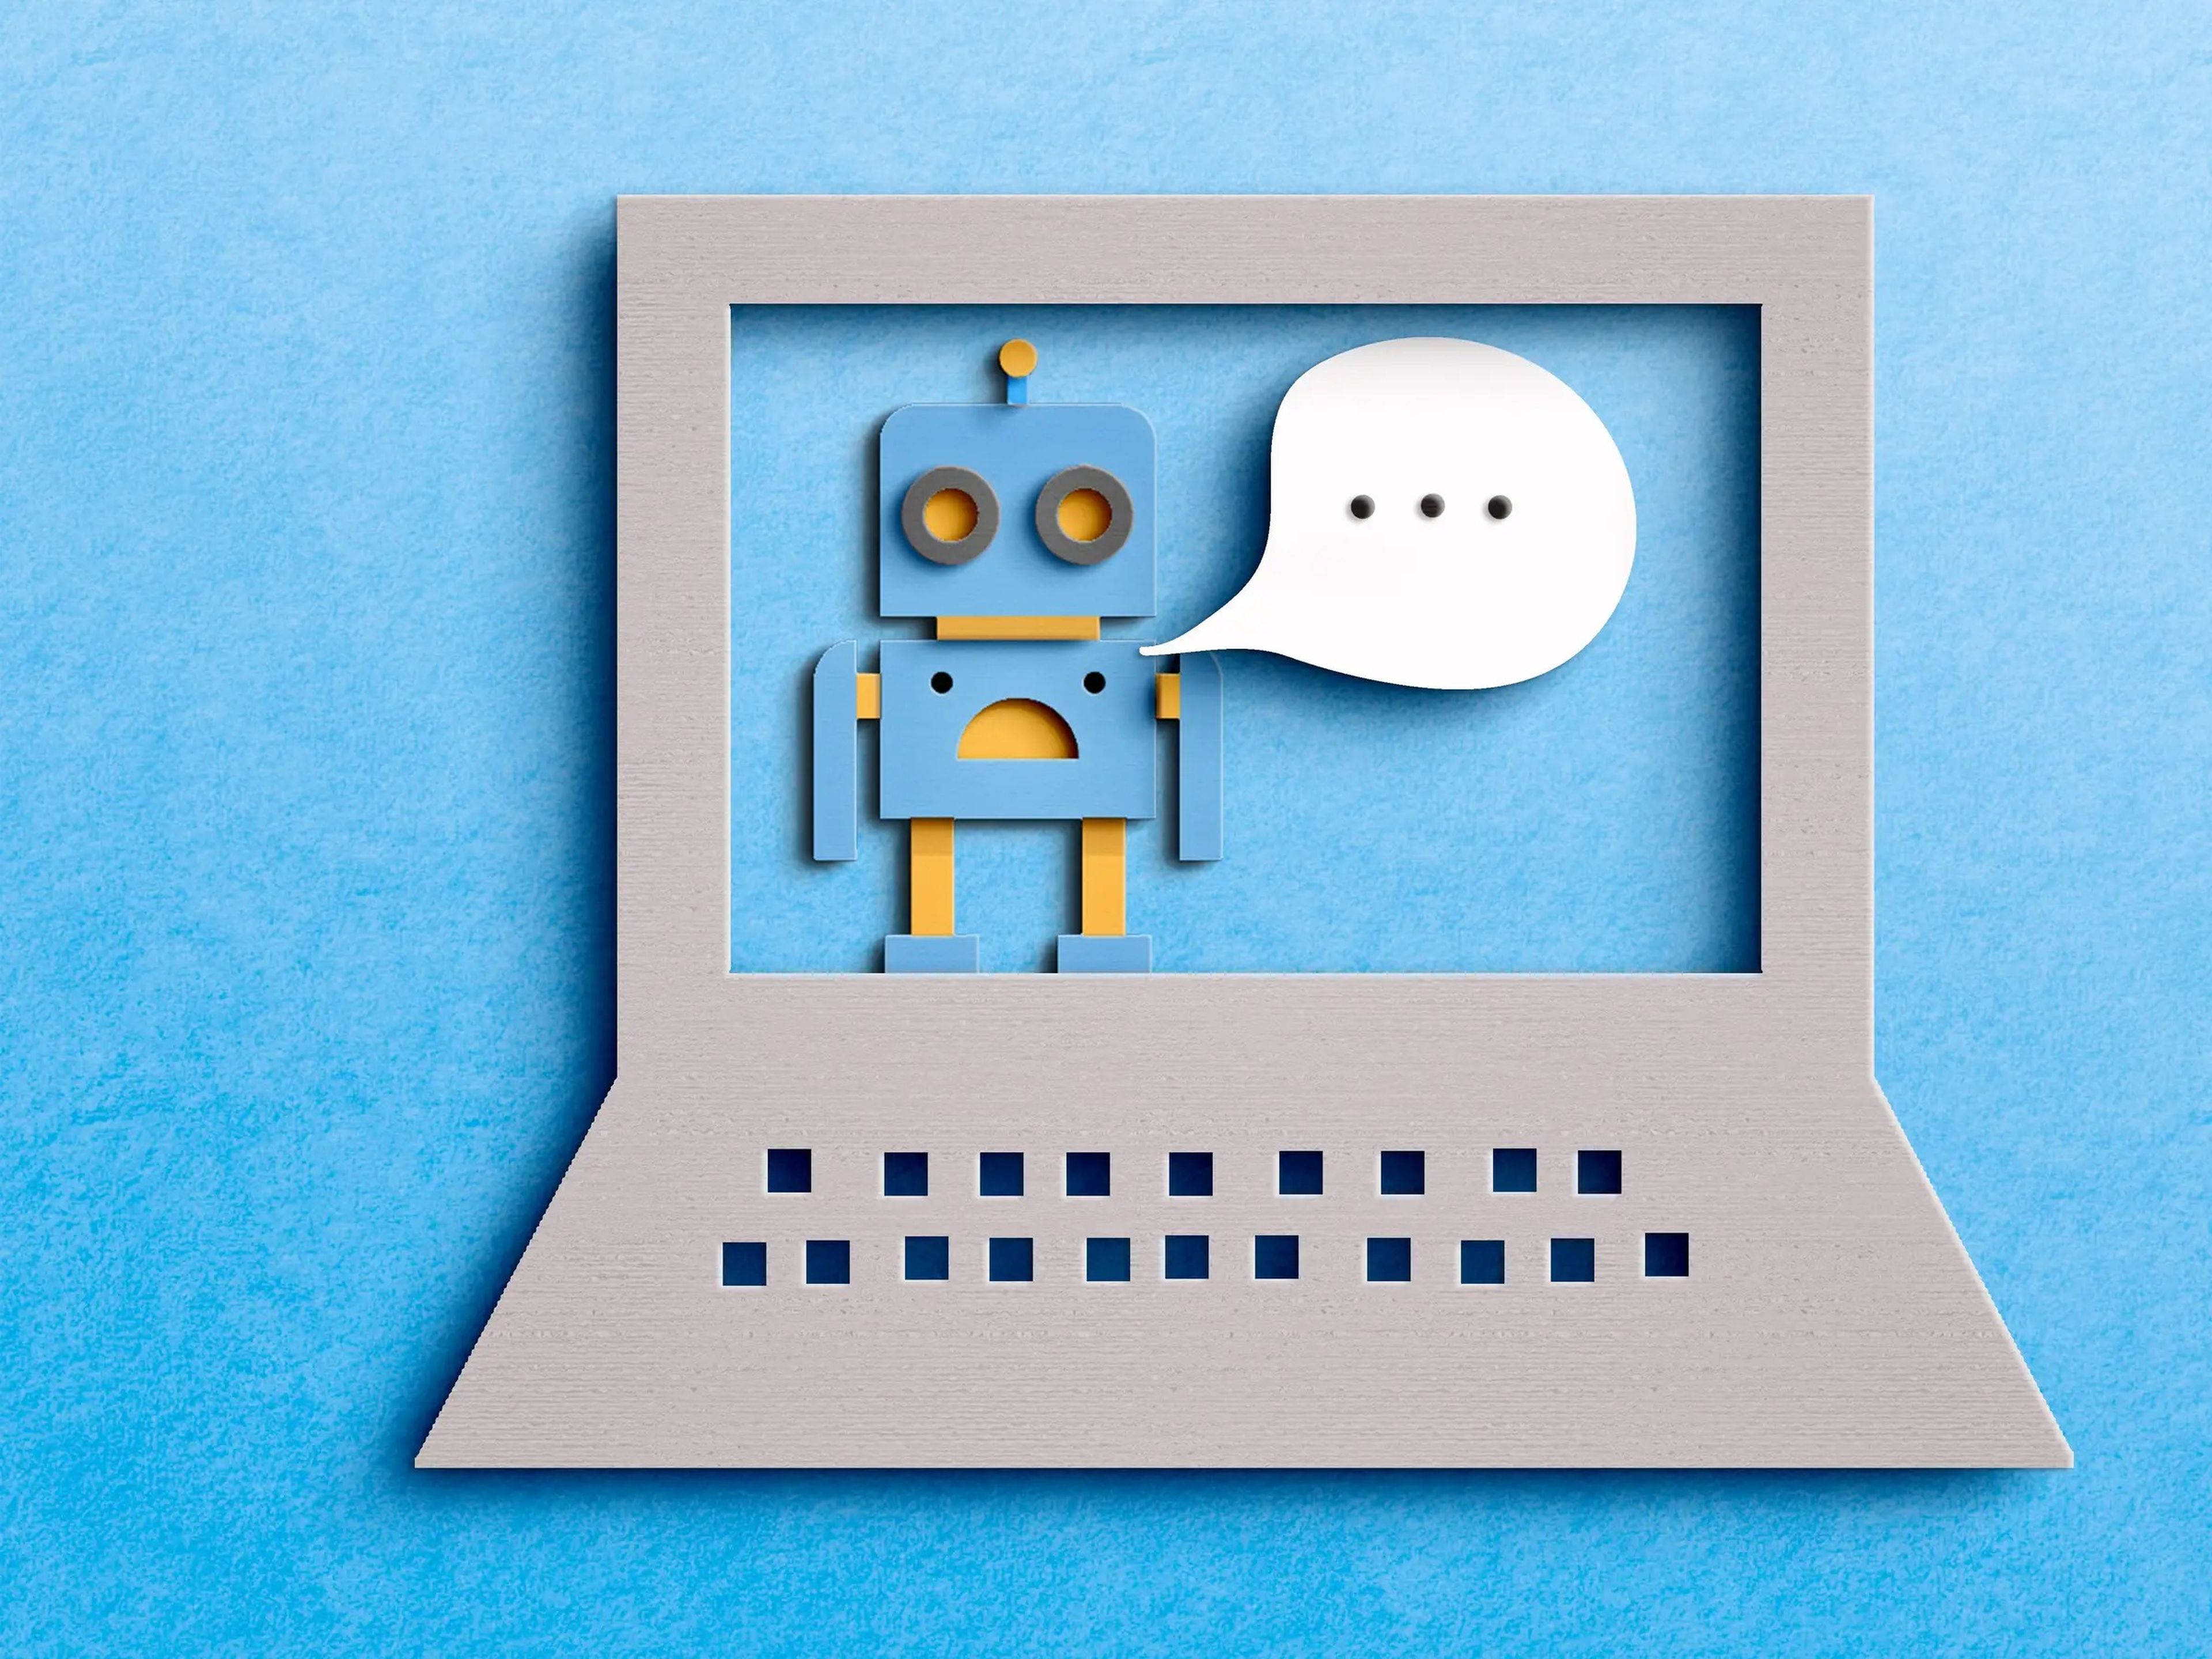 A illustration of a cartoon robot, with a speech bubble coming out of its mouth, in a cartoon computer on a blue background.